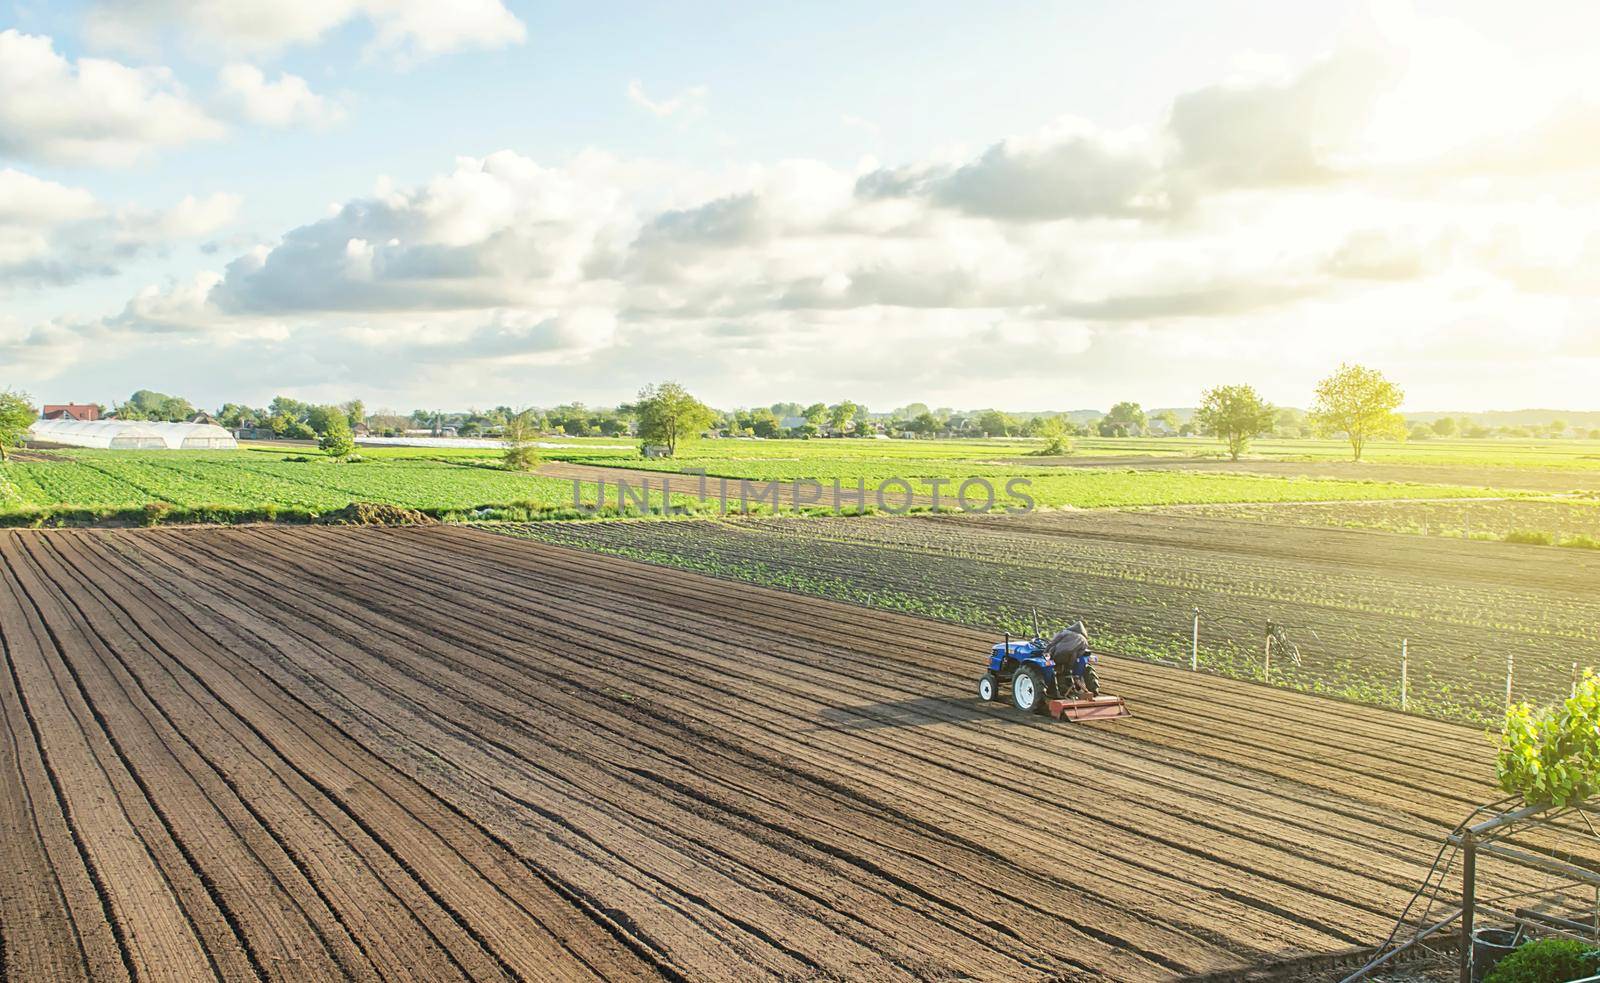 A tractor rides on a farm field. Farmer on a tractor with milling machine loosens, grinds and mixes soil. Farming and agriculture. Loosening the surface, cultivating the land for further planting. by iLixe48